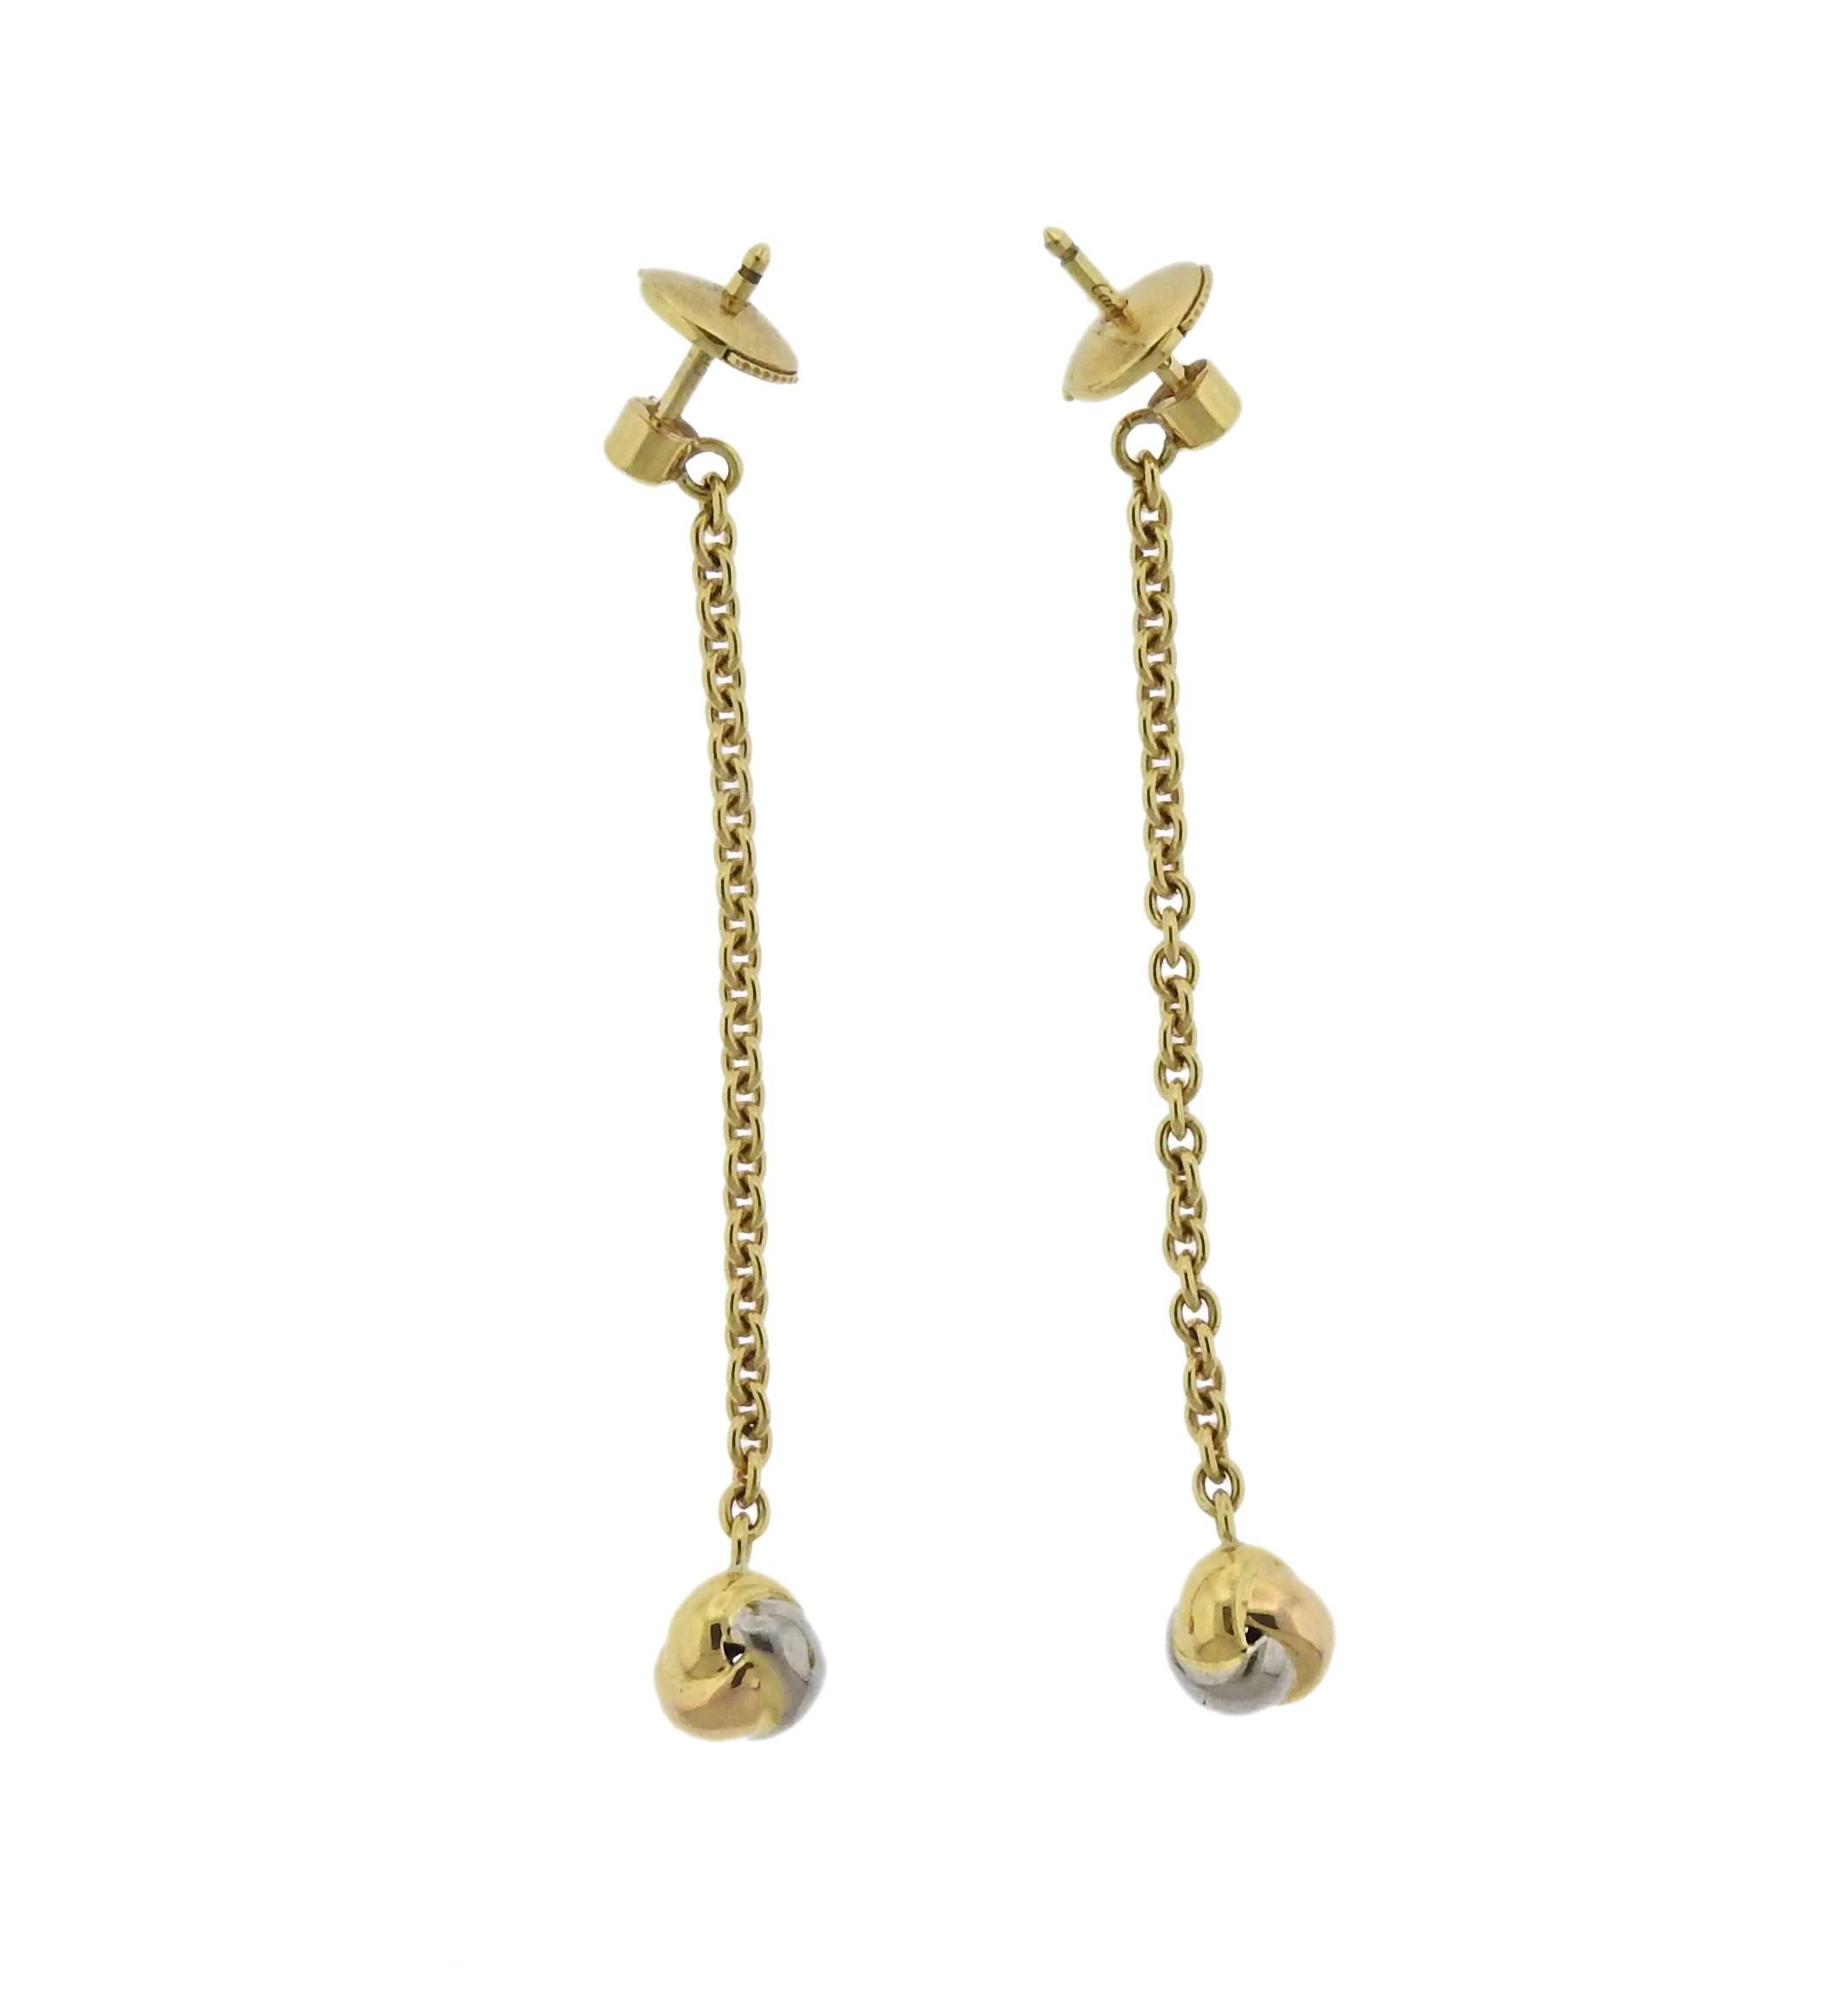 Pair of 18k gold long drop earrings by Cartier for Trinity collection. Come with COA and a copy of Cartier receipt from 2004 with $1300 retail. Current retail is significantly higher. Earrings are 55mm long , bottom parts - 7mm x 6.5mm, weight is